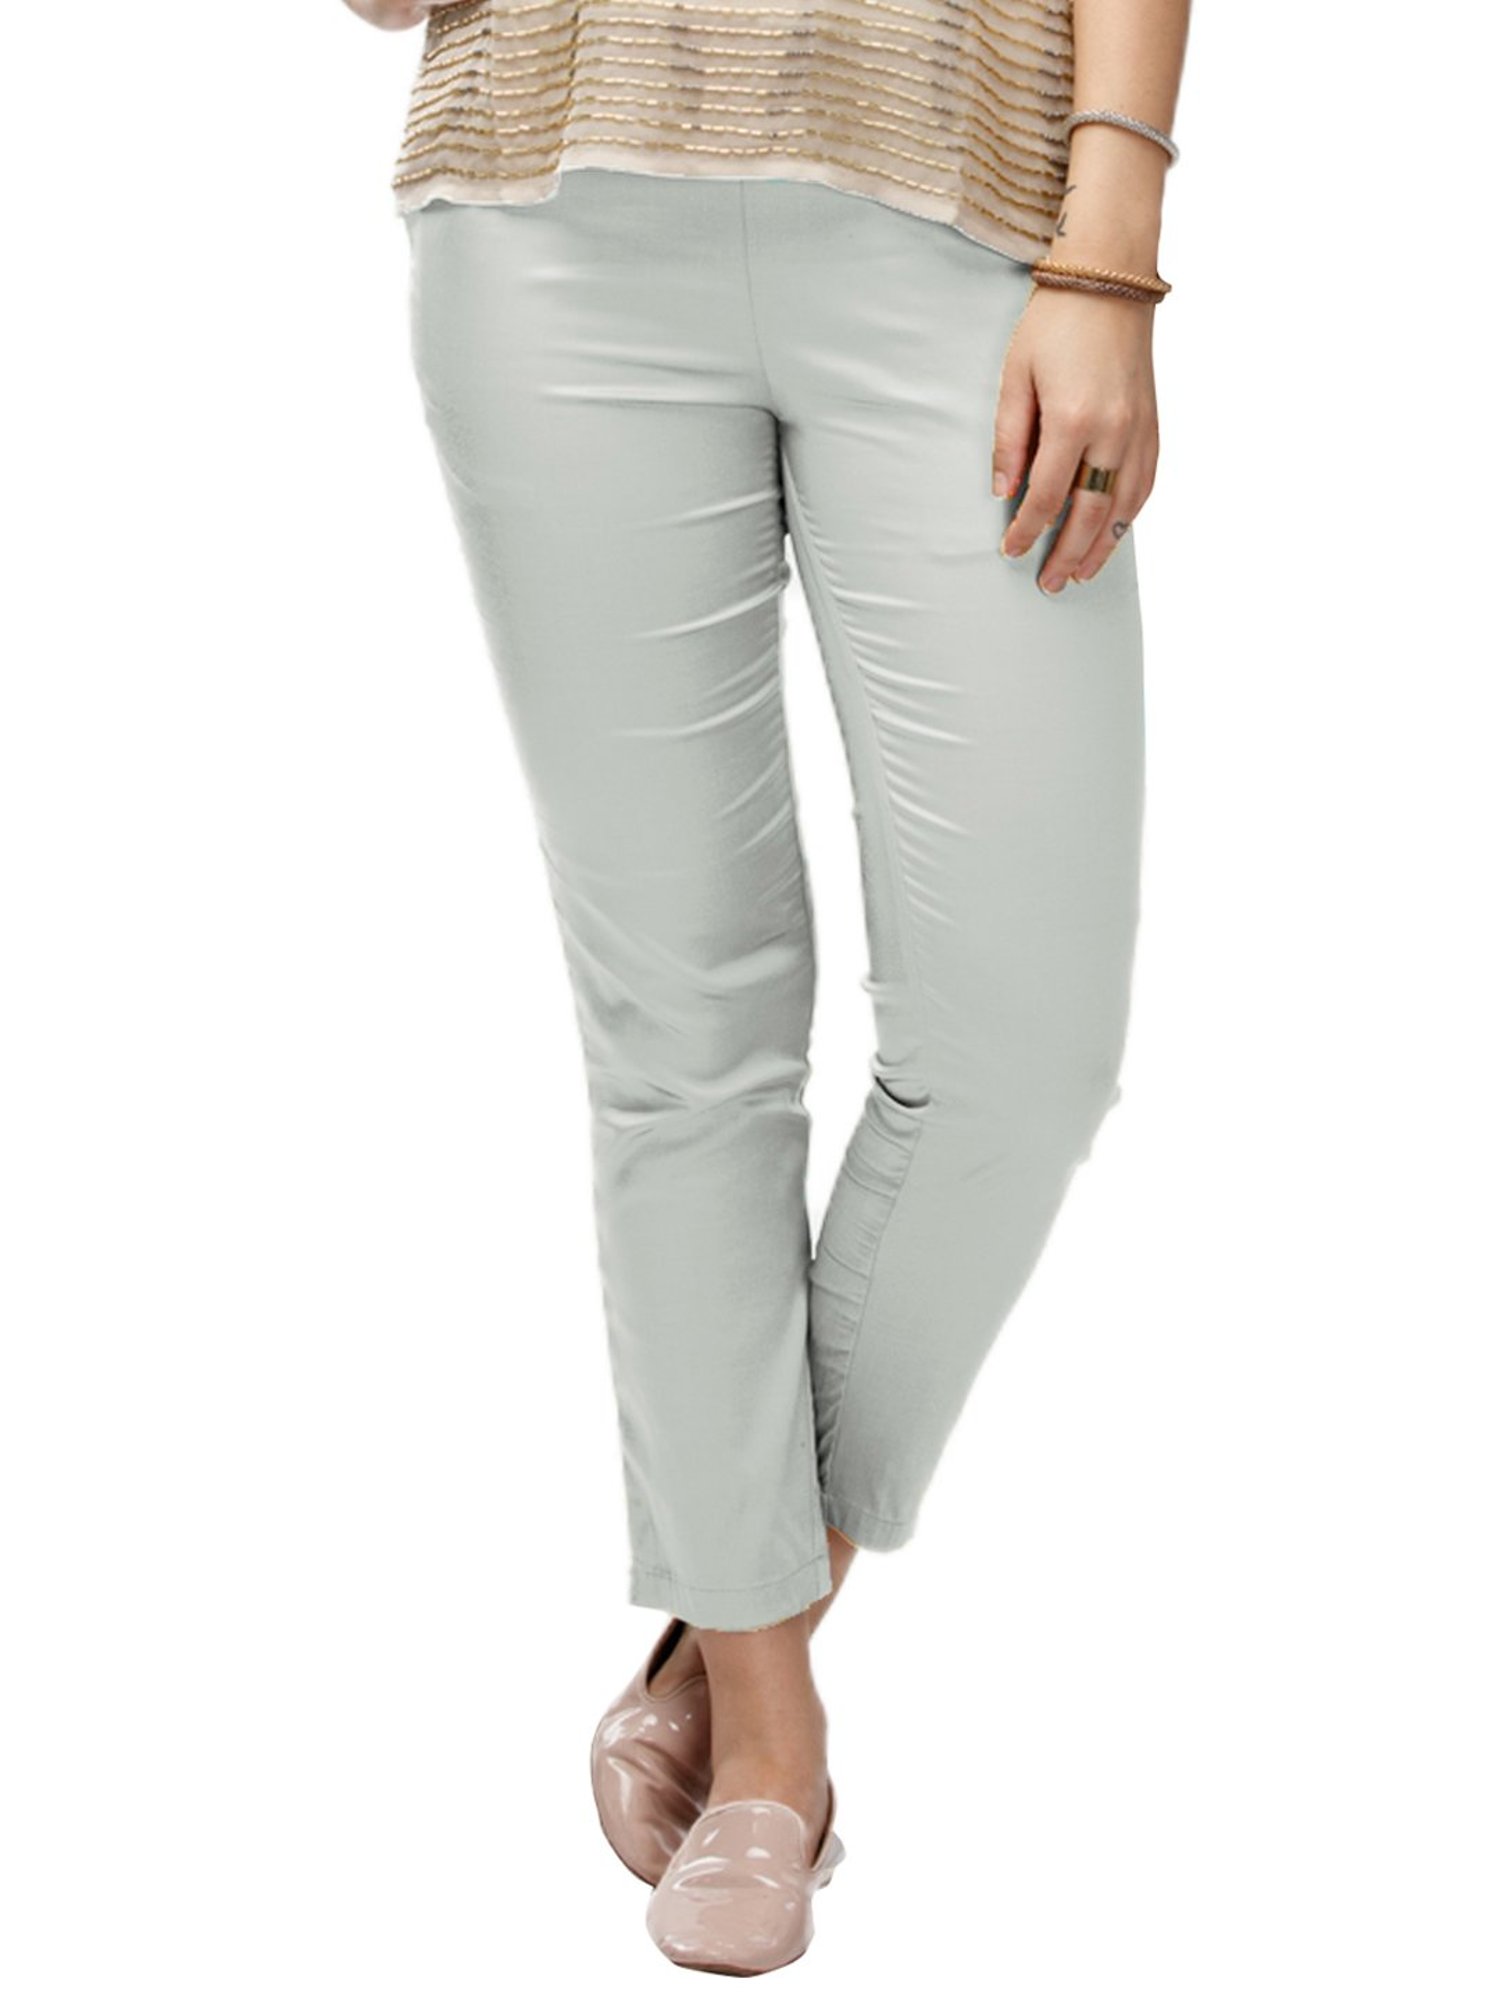 Buy Go Colors Silver Slim Fit Pencil Pants from top Brands at Best Prices  Online in India  Tata CLiQ